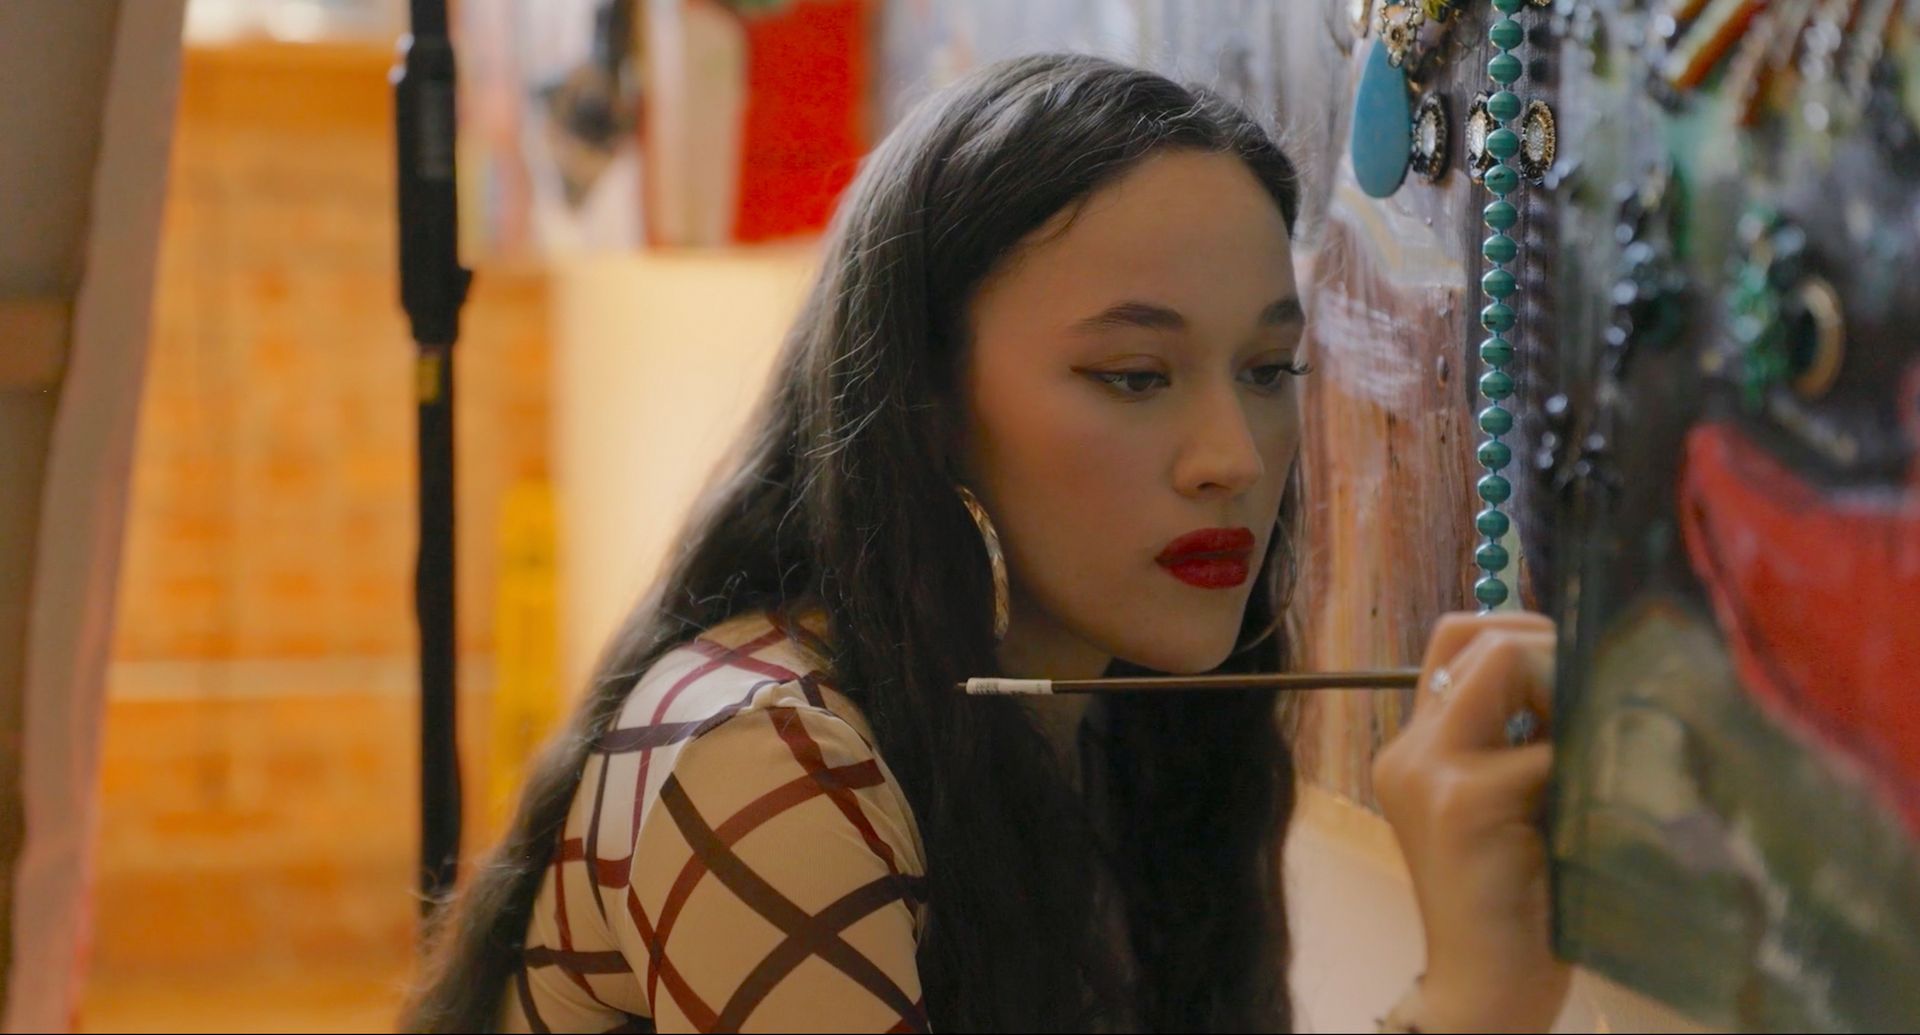 Artist Gisela McDaniel in Kelcey Edwards’s documentary The Art of Making It. Image courtesy of Wischful Thinking Productions